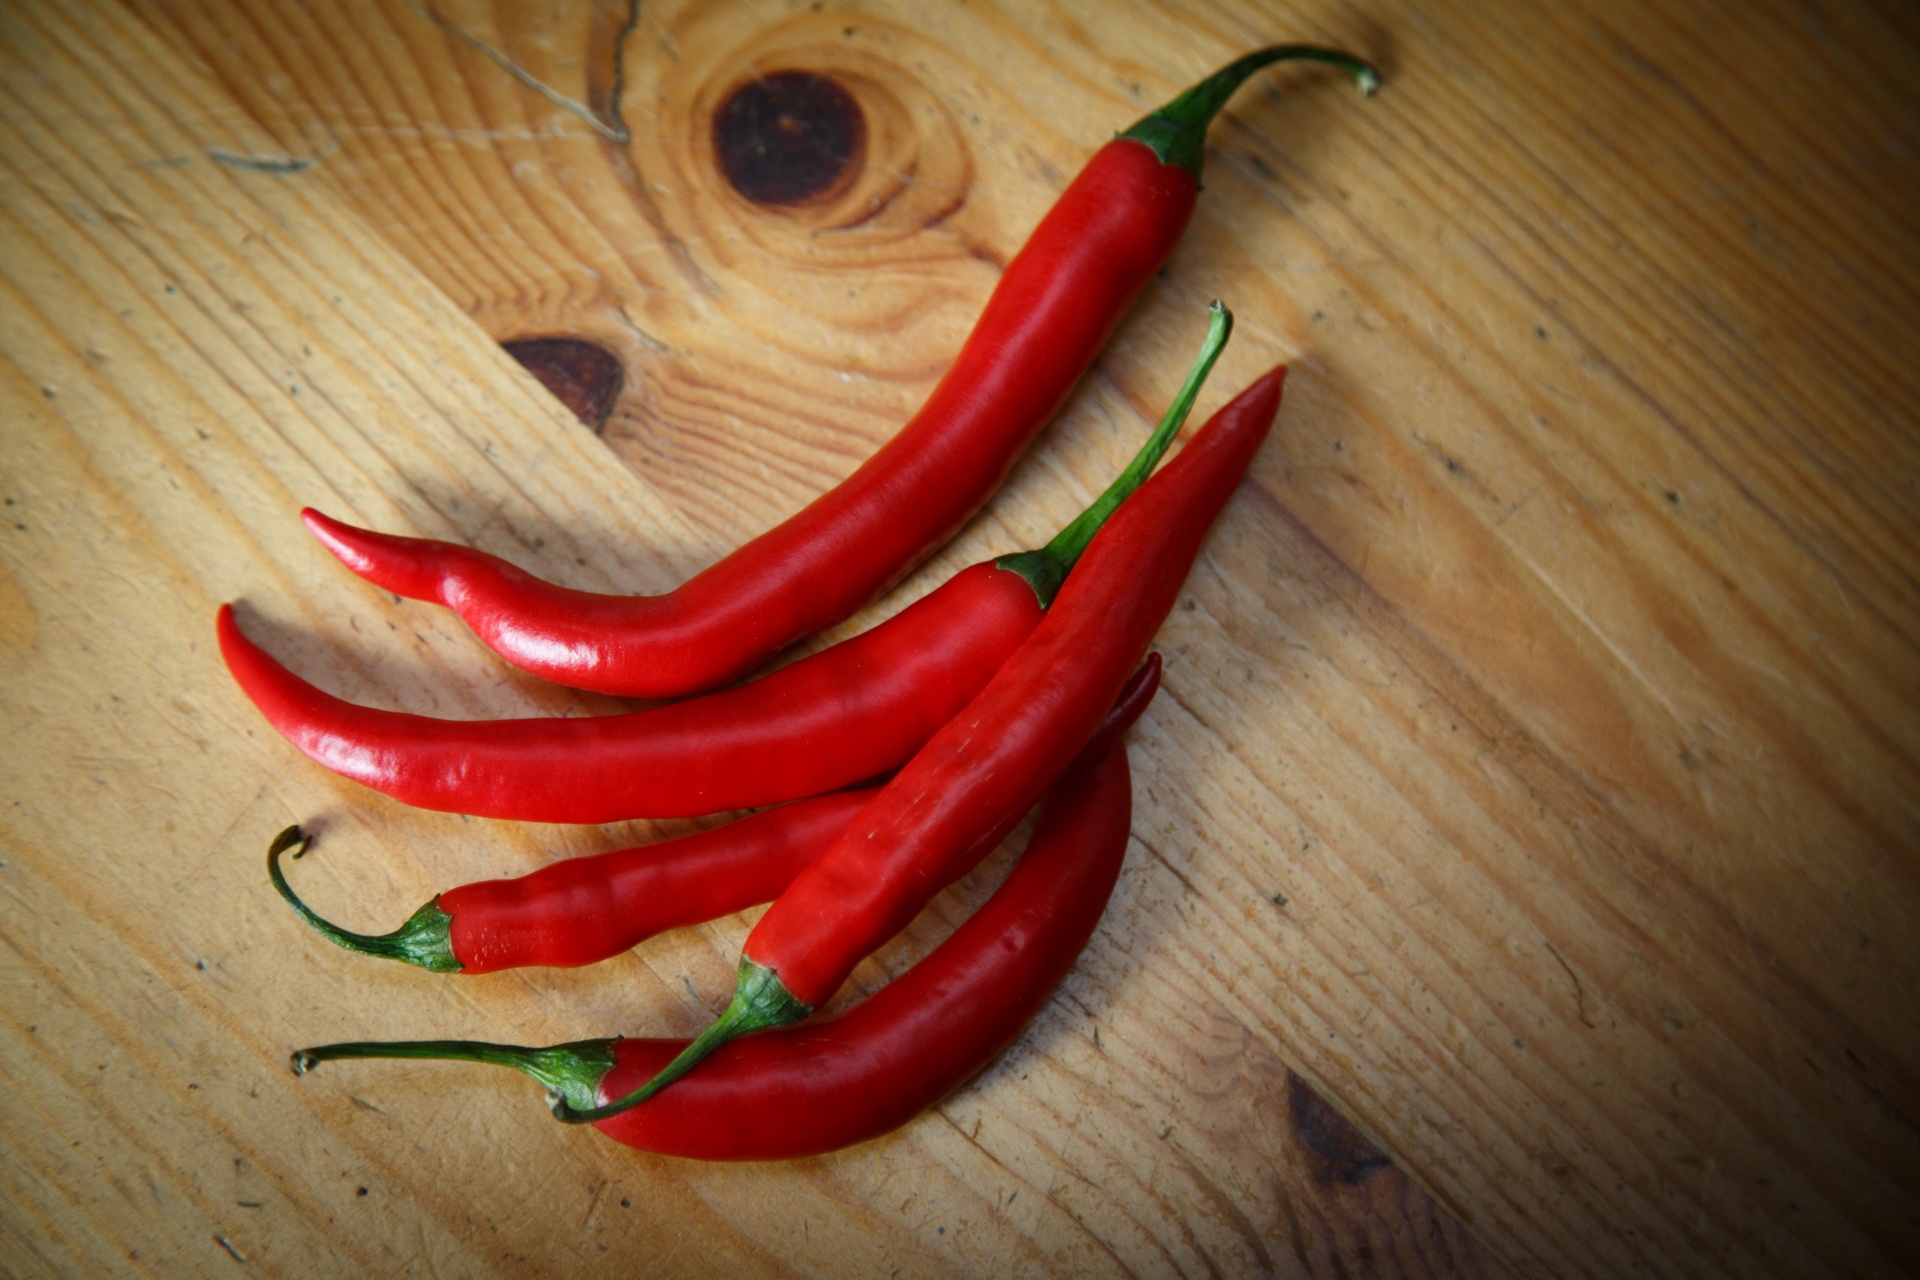 pepper red paprika free photo